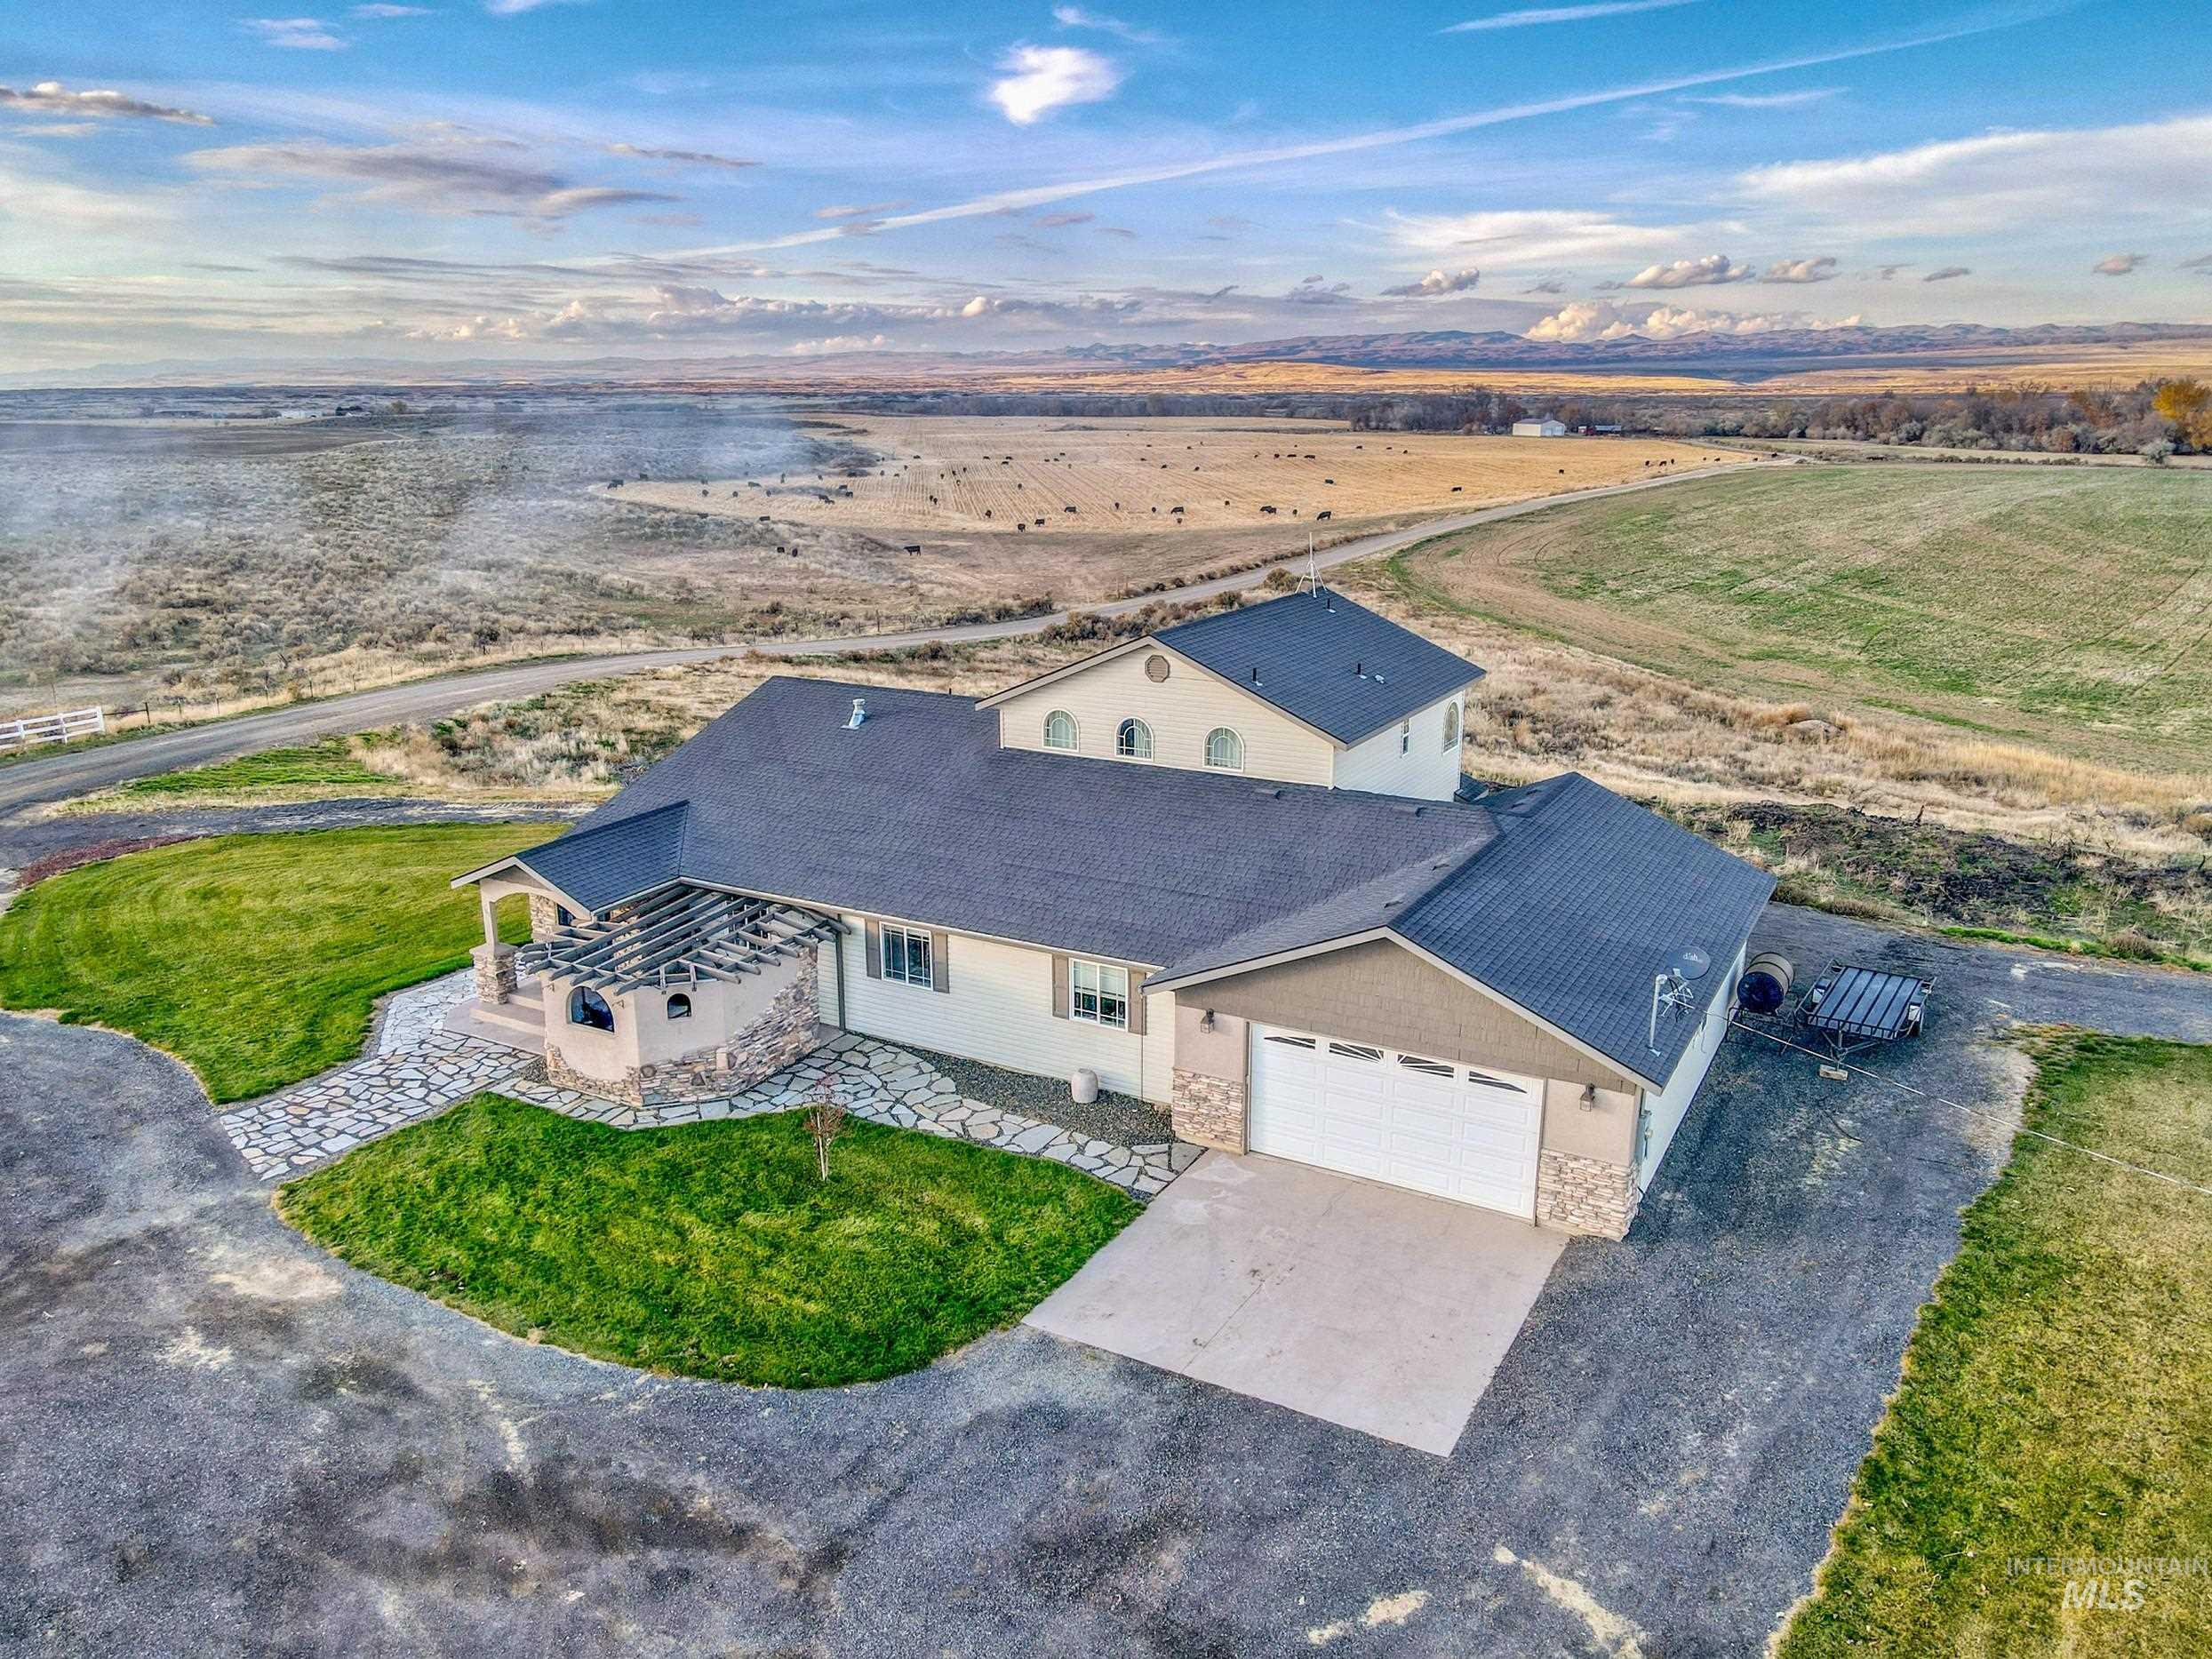 560 Riverview Dr., Gooding, Idaho 83330, 4 Bedrooms, 2.5 Bathrooms, Residential For Sale, Price $650,000,MLS 98898876